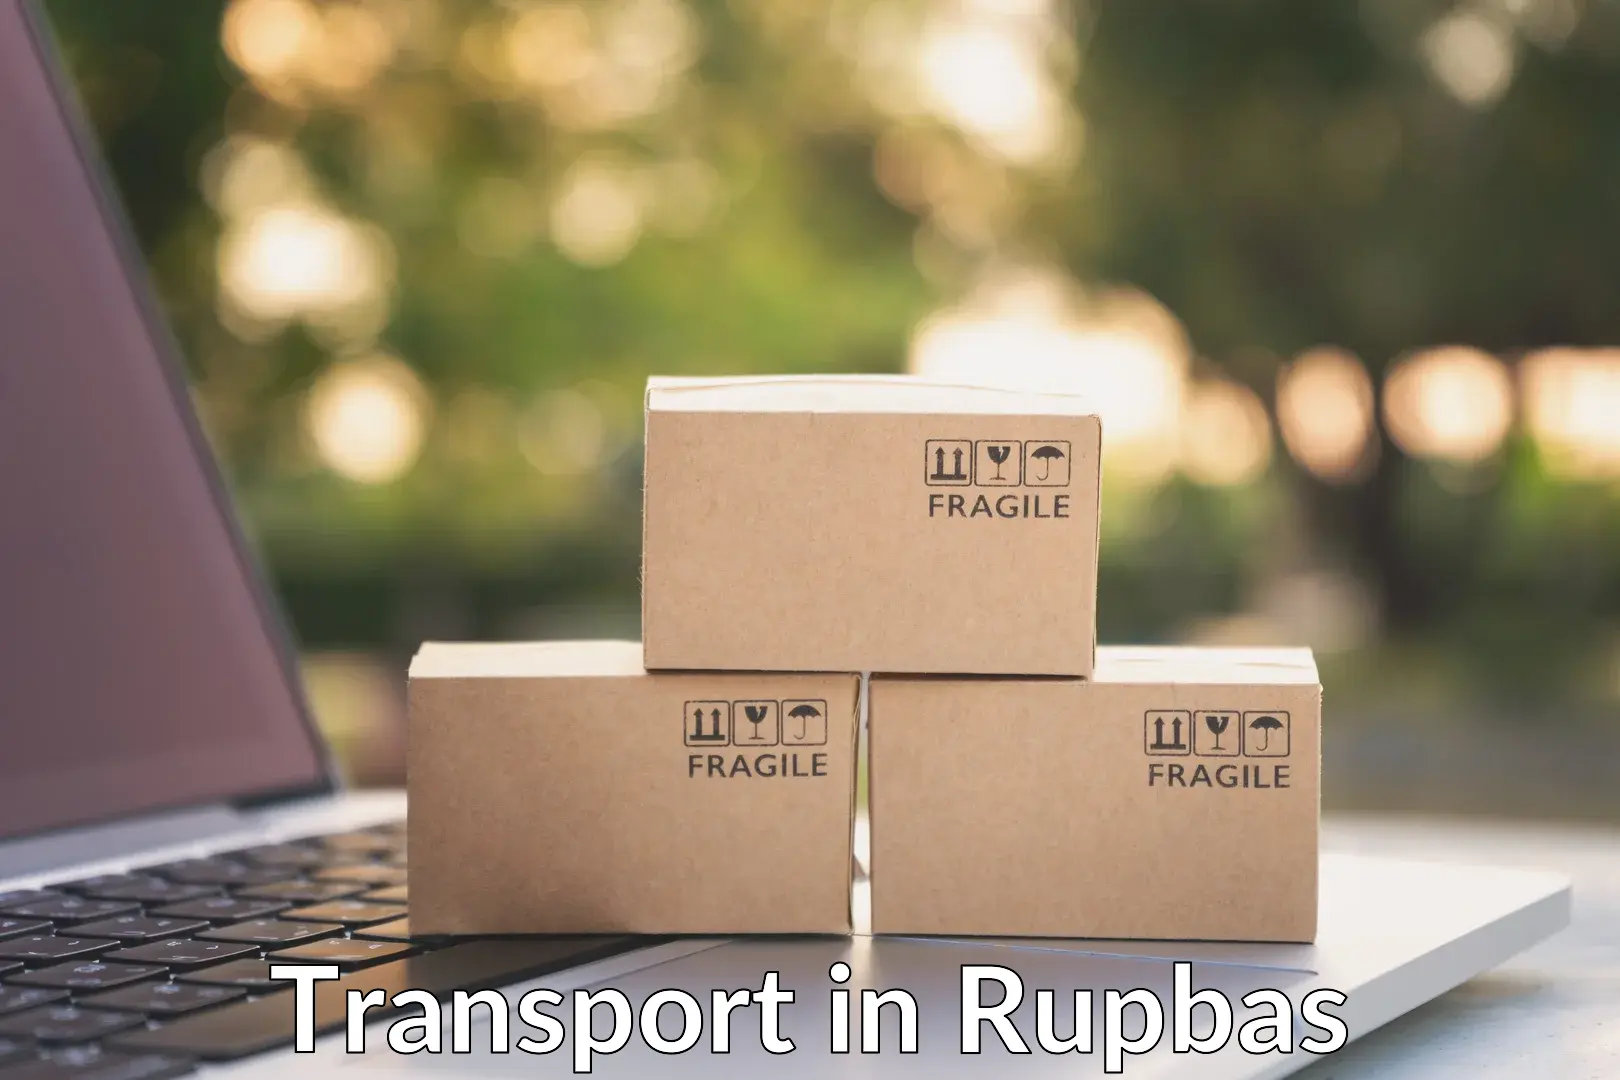 Road transport online services in Rupbas